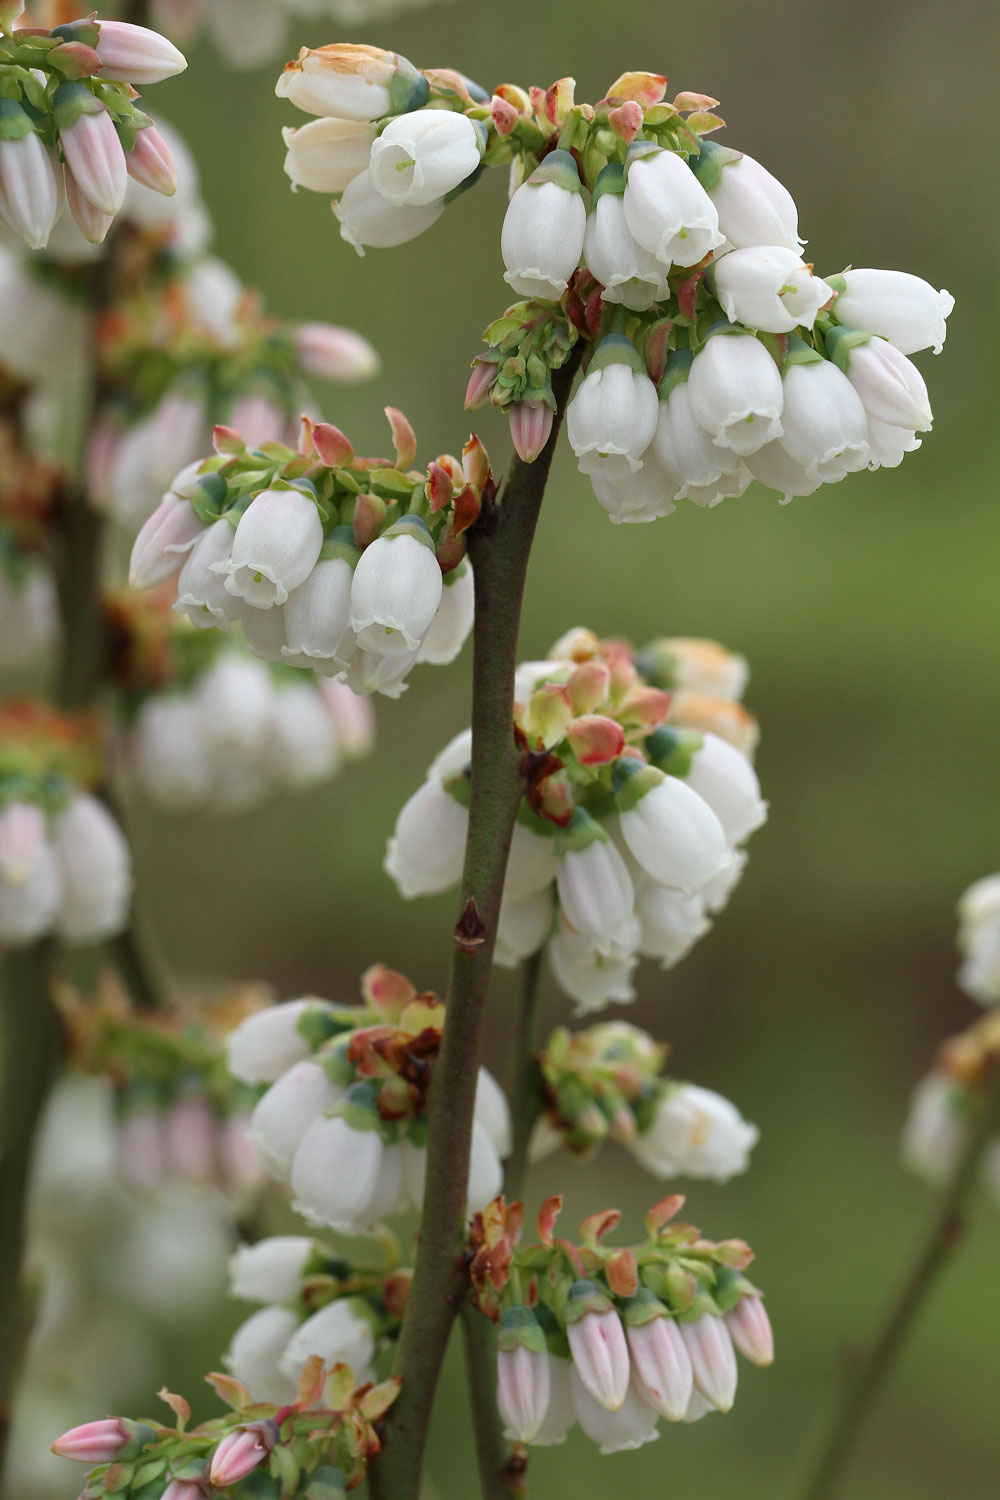 Blueberry blooms. Photo by Debbie Roos.